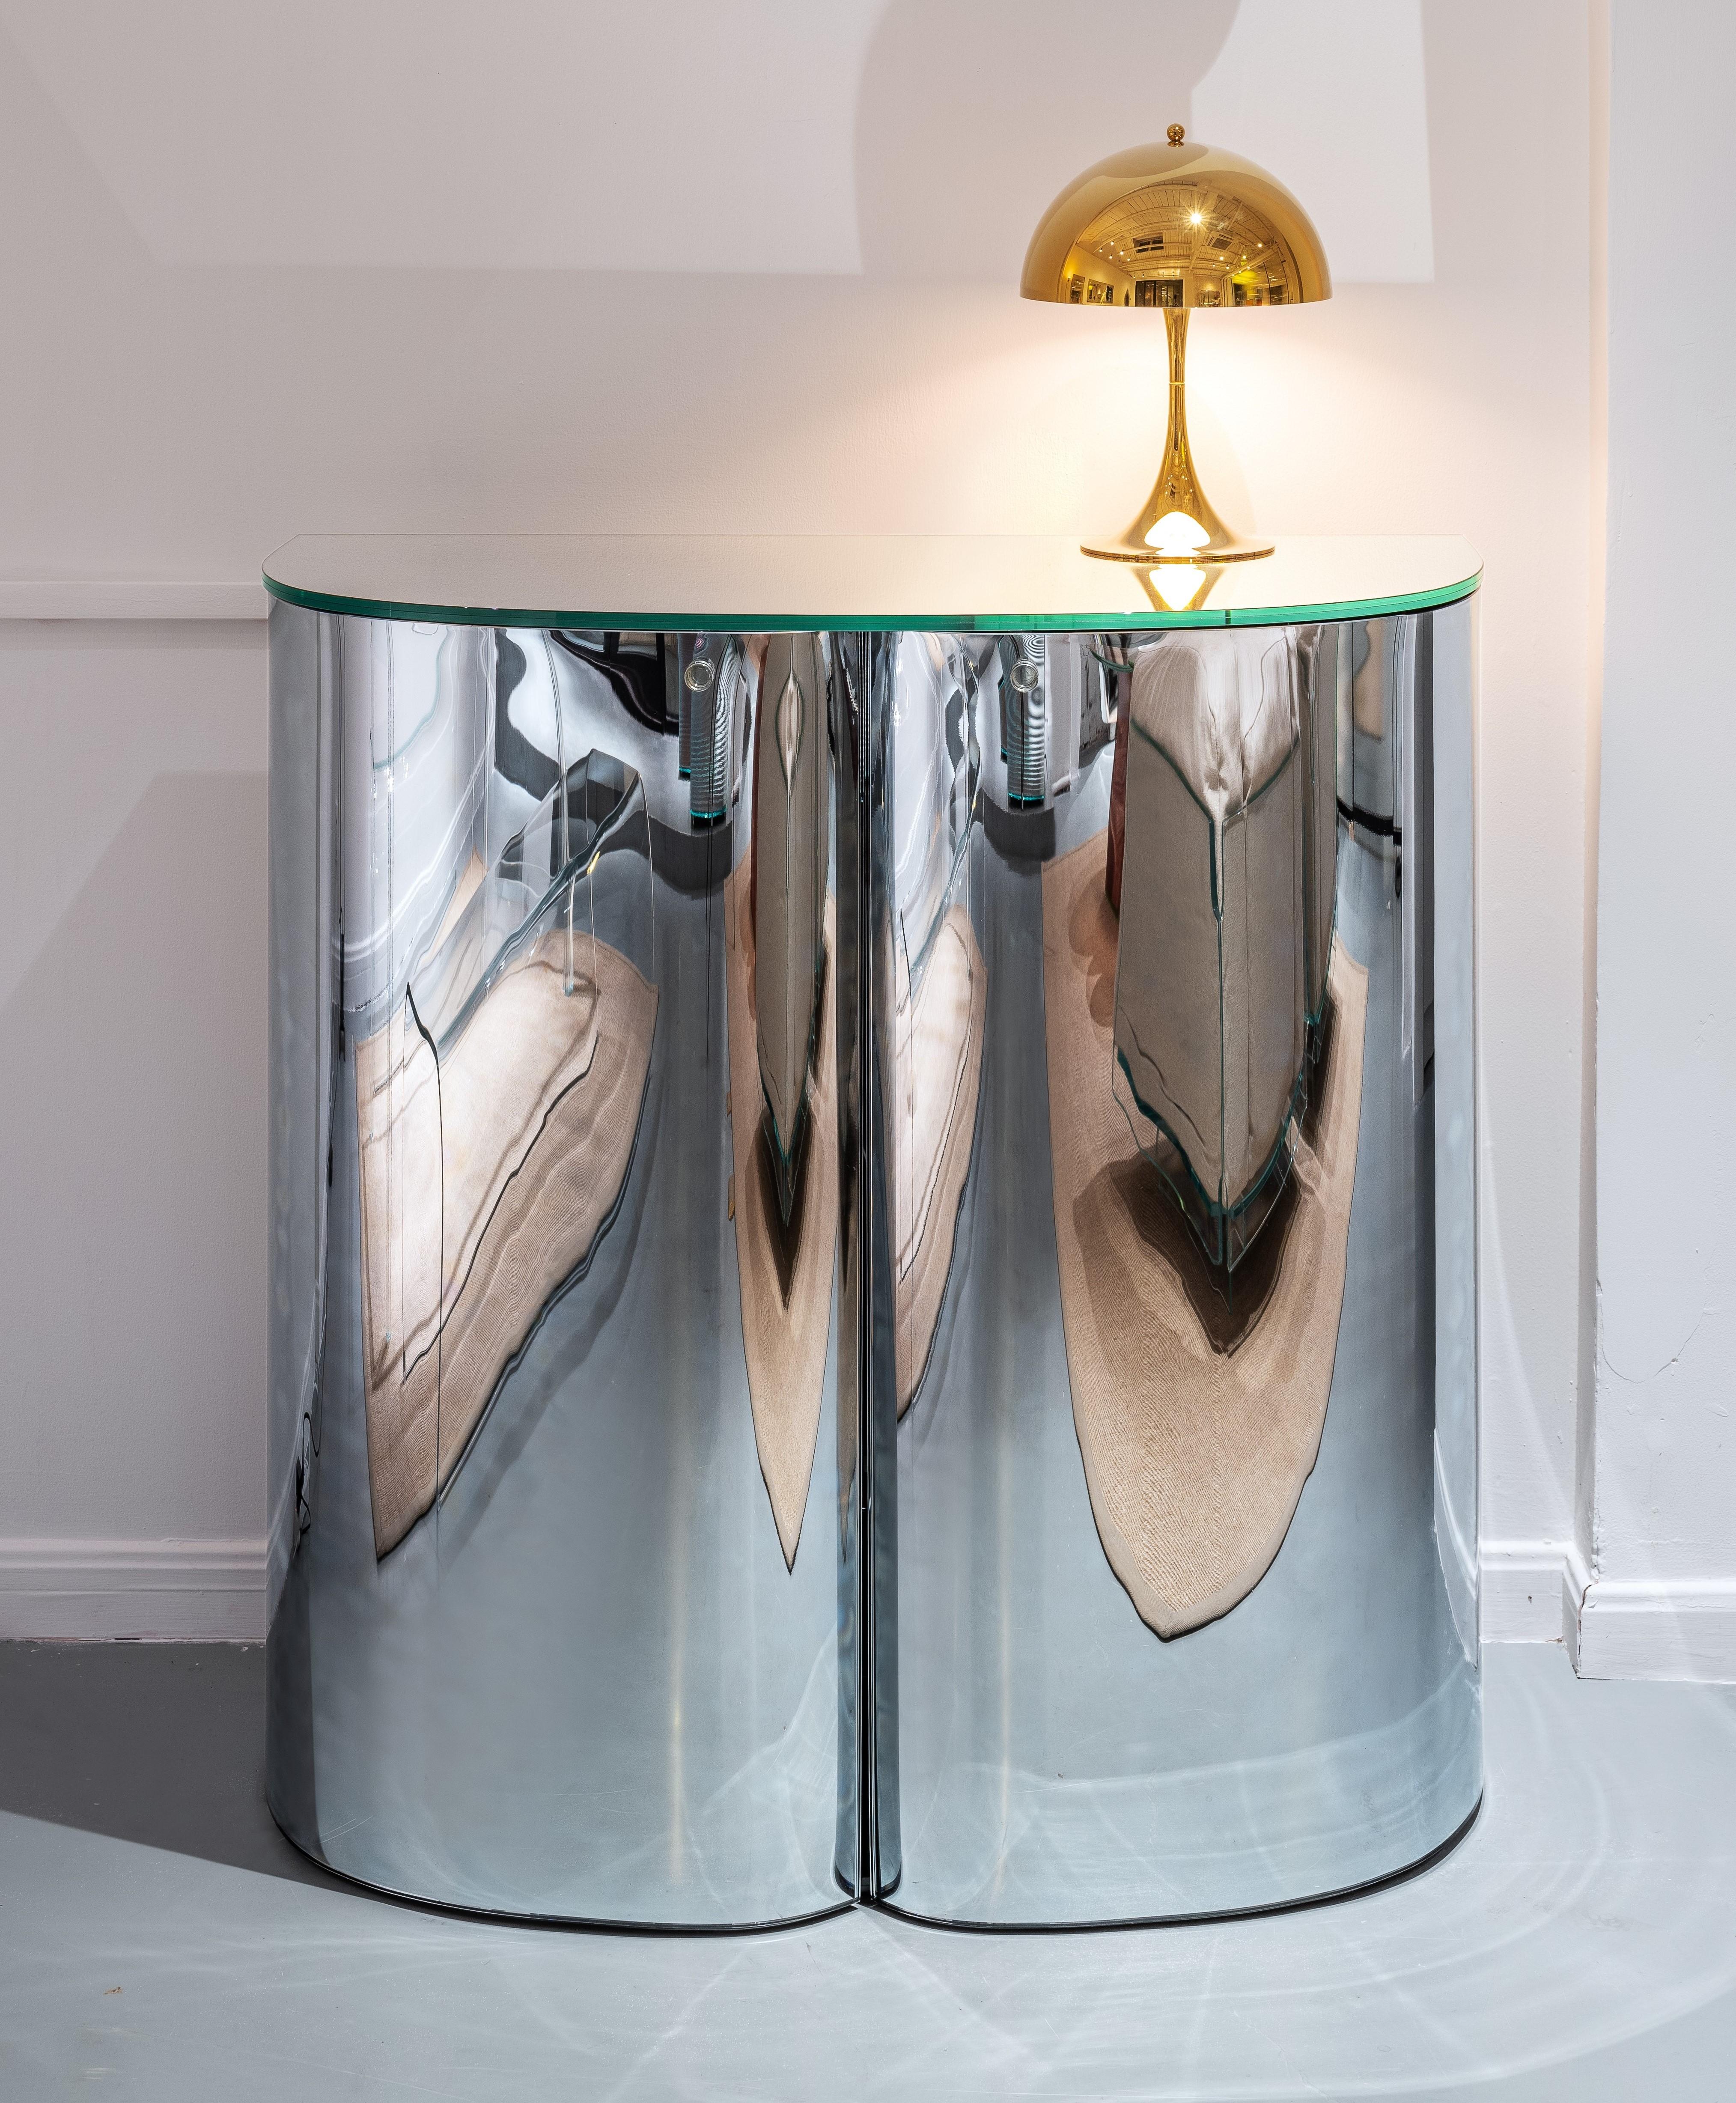 Storage units in a special mirrored glass with soft curved shapes.
The structure is in 6+6 mm laminated glass fully mirrored, both inside and outside.
The doors are in 6 mm curved and tempered double-sided mirrored glass, characterized by